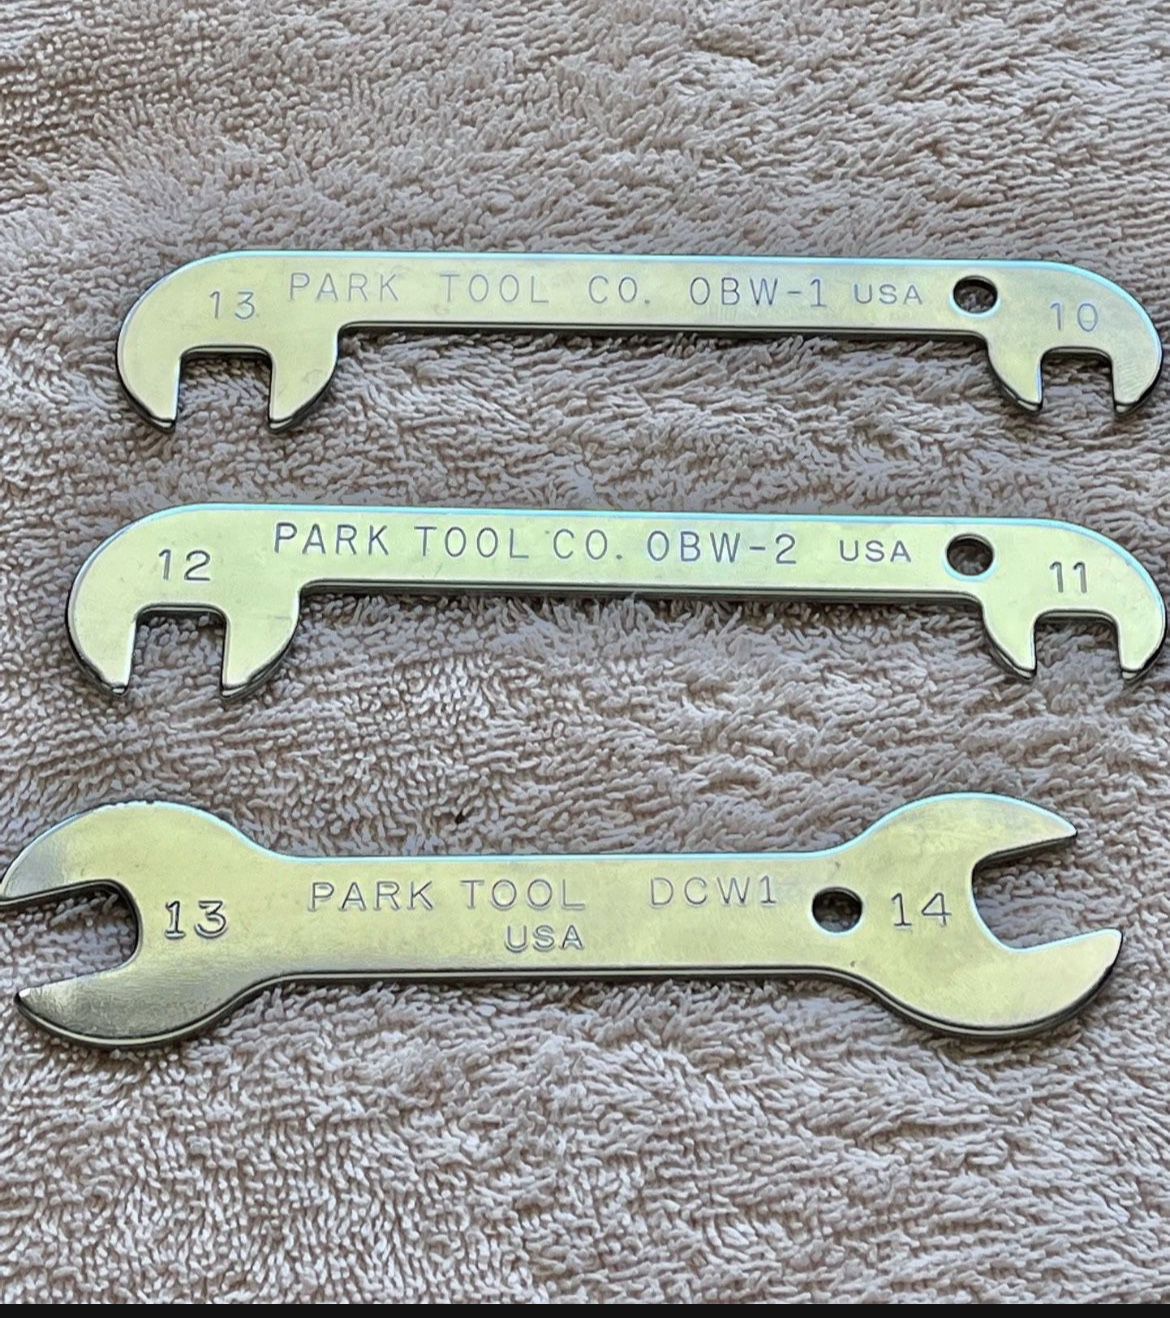 Park Tool Off Set Wrenches, DCW1, OBW-1 / OBW-2…. All For $20